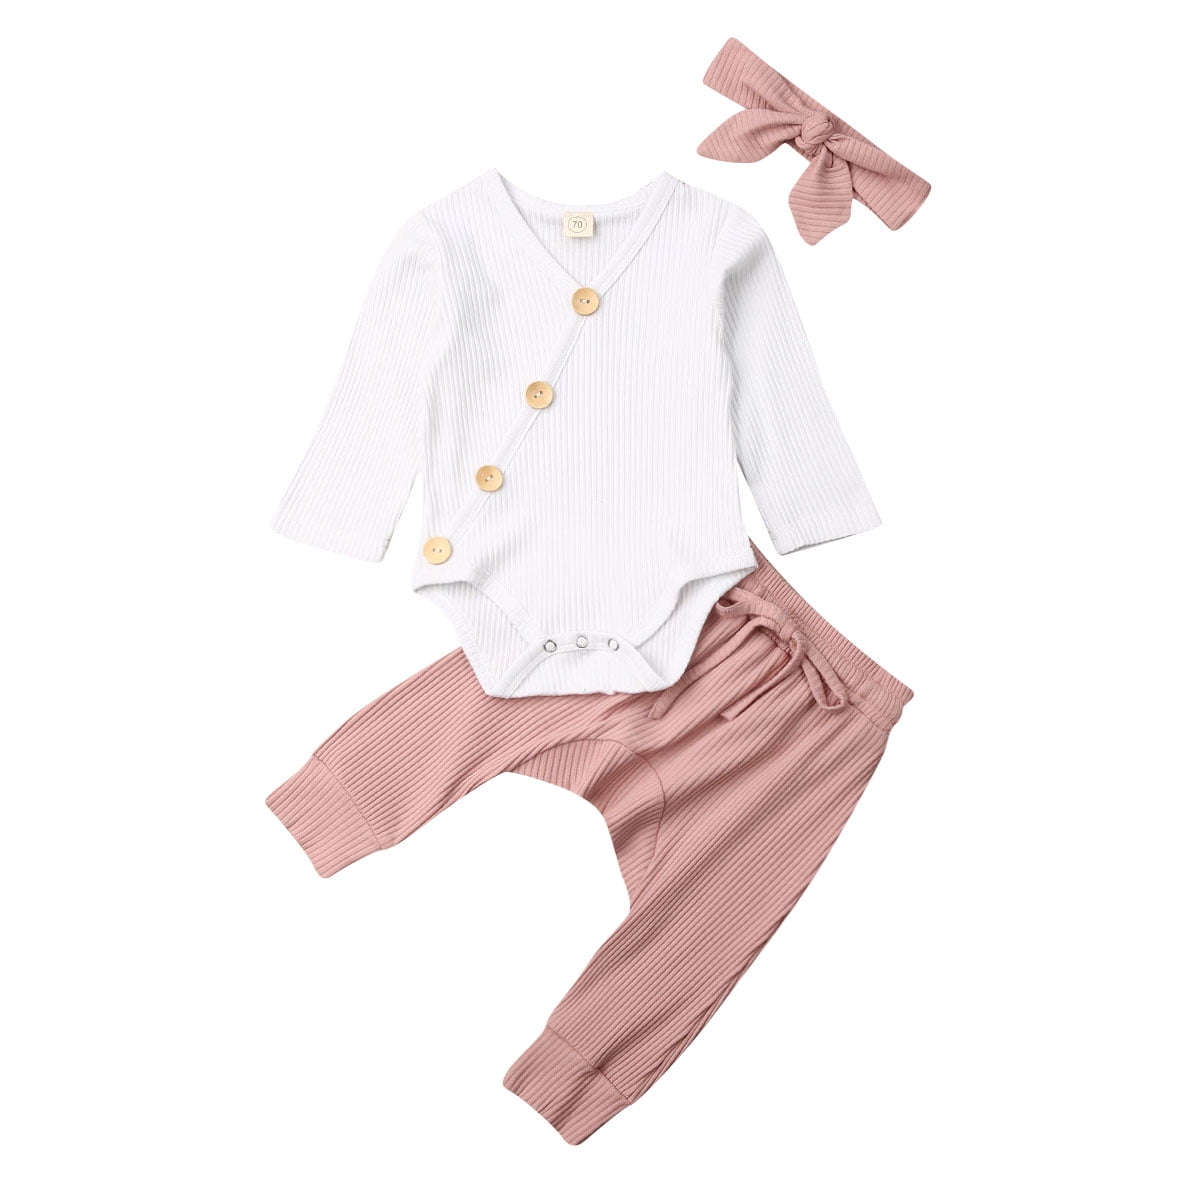 New Born Infant Baby Girls Boys Clothing Outfit Quilted Cardigan Top Trouser Set